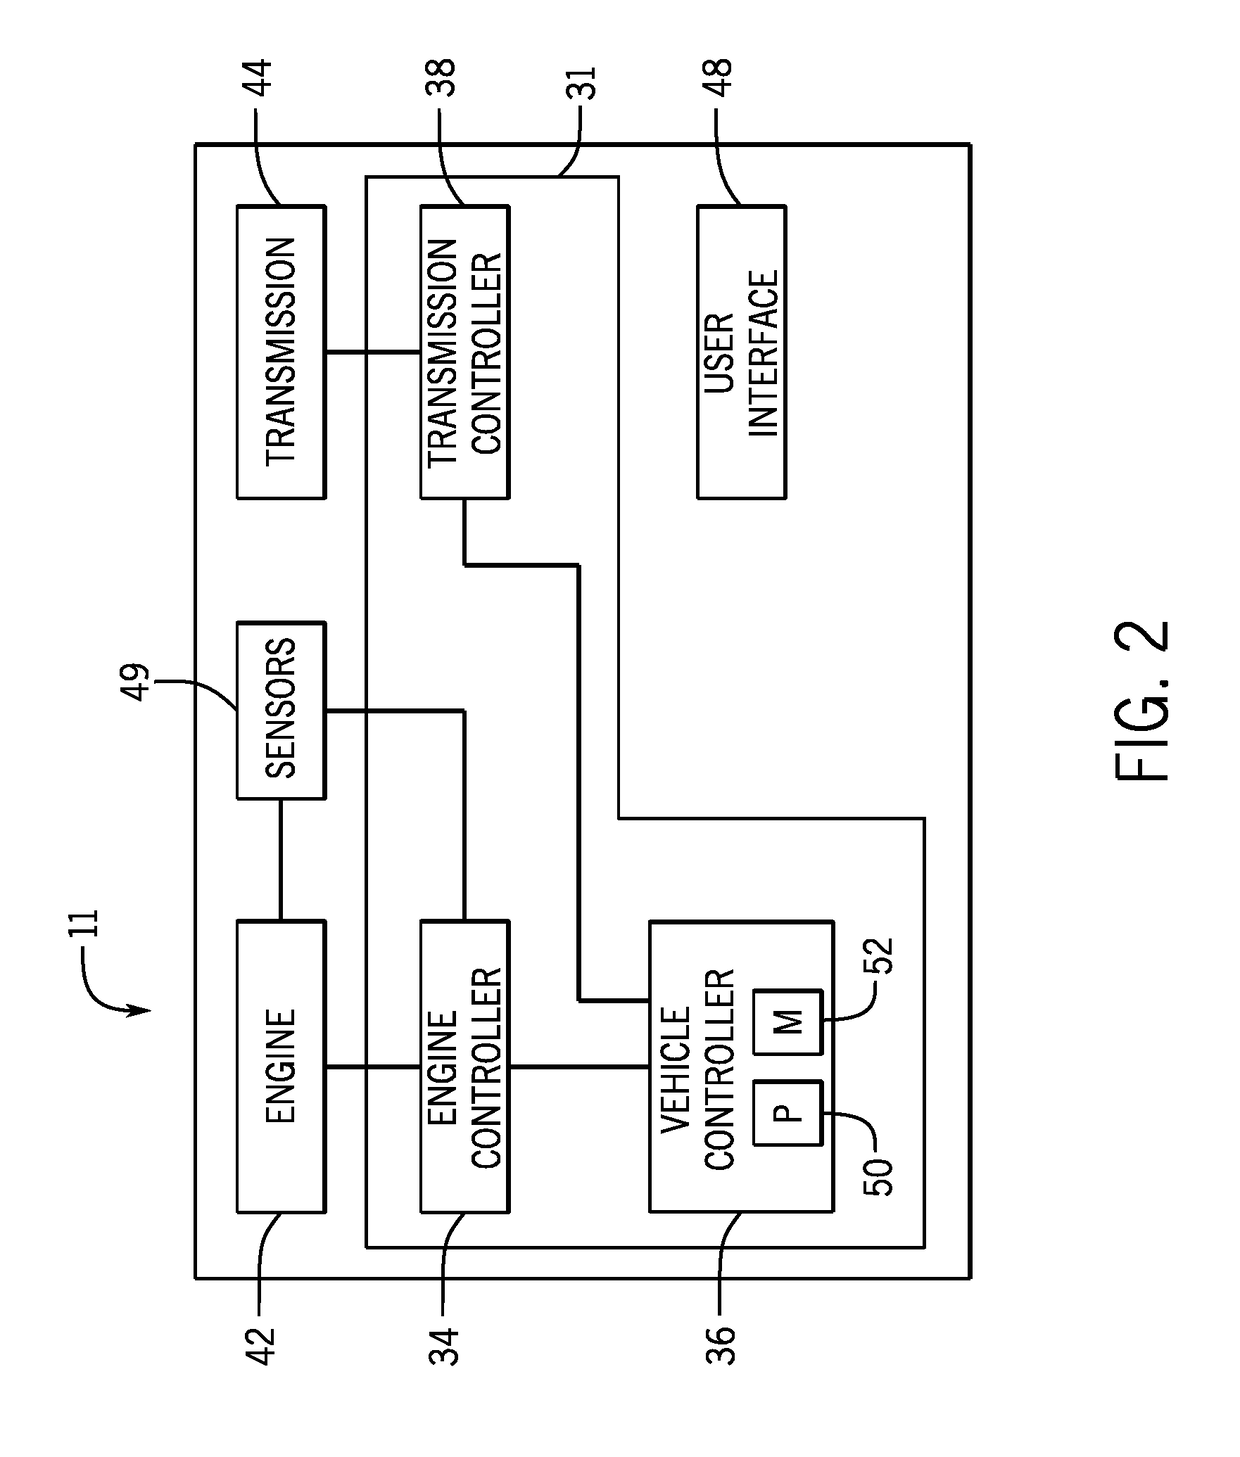 System and method for controlling a powershift transmission